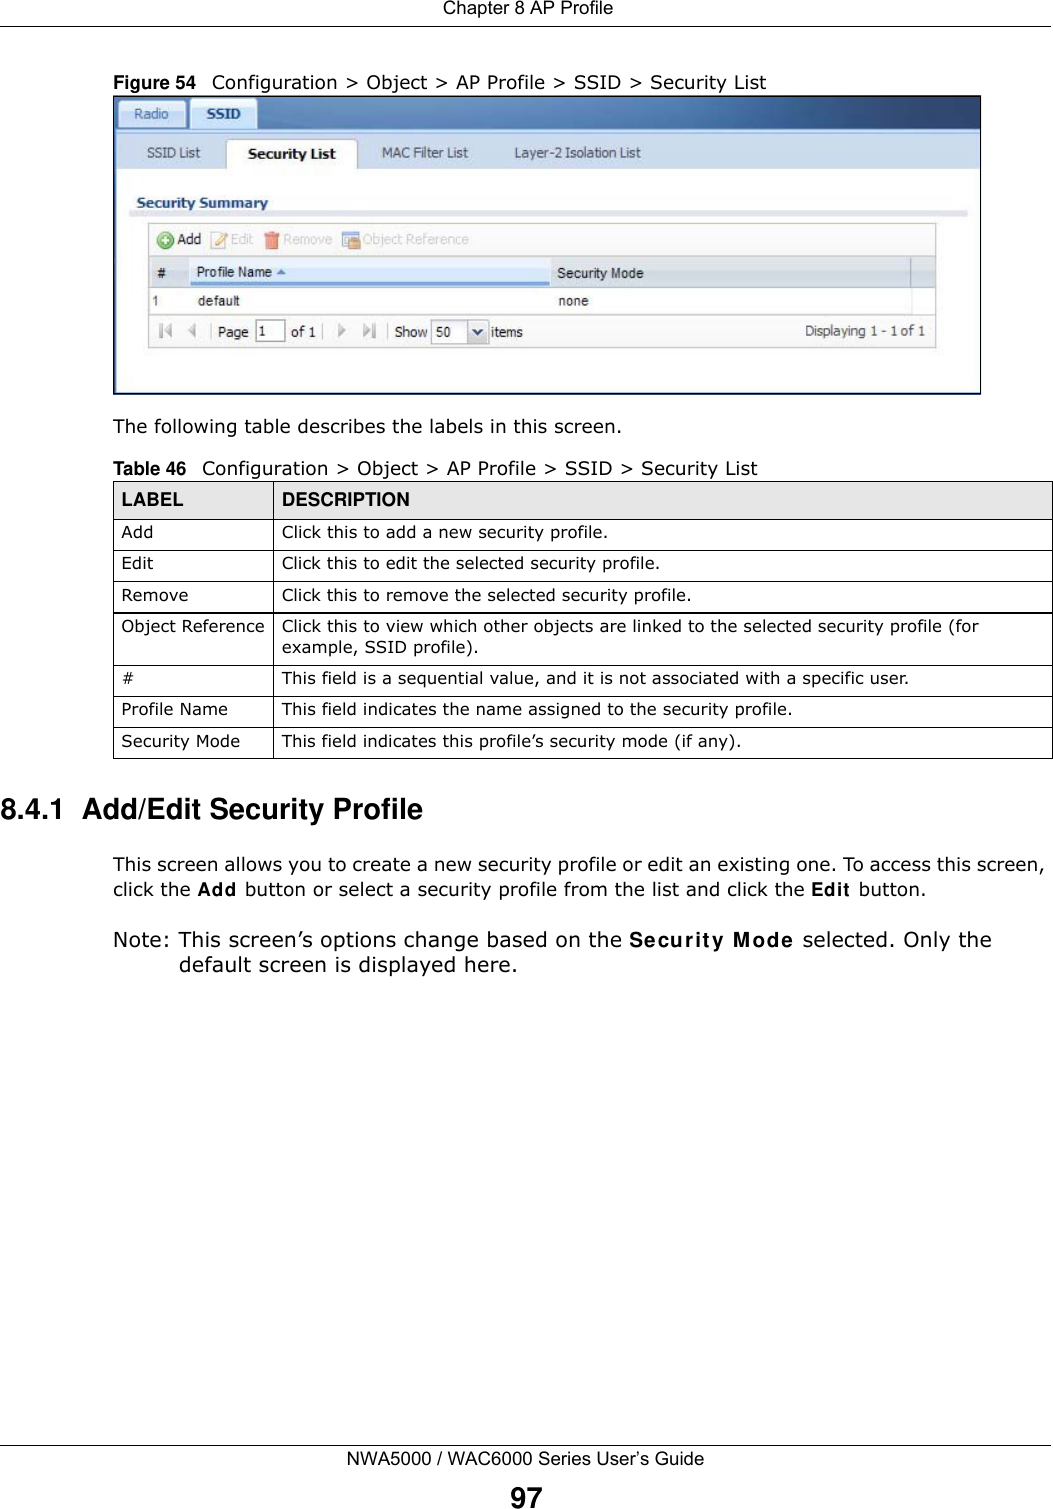  Chapter 8 AP ProfileNWA5000 / WAC6000 Series User’s Guide97Figure 54   Configuration &gt; Object &gt; AP Profile &gt; SSID &gt; Security ListThe following table describes the labels in this screen.  8.4.1  Add/Edit Security ProfileThis screen allows you to create a new security profile or edit an existing one. To access this screen, click the Add button or select a security profile from the list and click the Edit button.Note: This screen’s options change based on the Security Mode selected. Only the default screen is displayed here.Table 46   Configuration &gt; Object &gt; AP Profile &gt; SSID &gt; Security ListLABEL DESCRIPTIONAdd Click this to add a new security profile.Edit Click this to edit the selected security profile.Remove Click this to remove the selected security profile.Object Reference Click this to view which other objects are linked to the selected security profile (for example, SSID profile).# This field is a sequential value, and it is not associated with a specific user.Profile Name This field indicates the name assigned to the security profile.Security Mode This field indicates this profile’s security mode (if any).